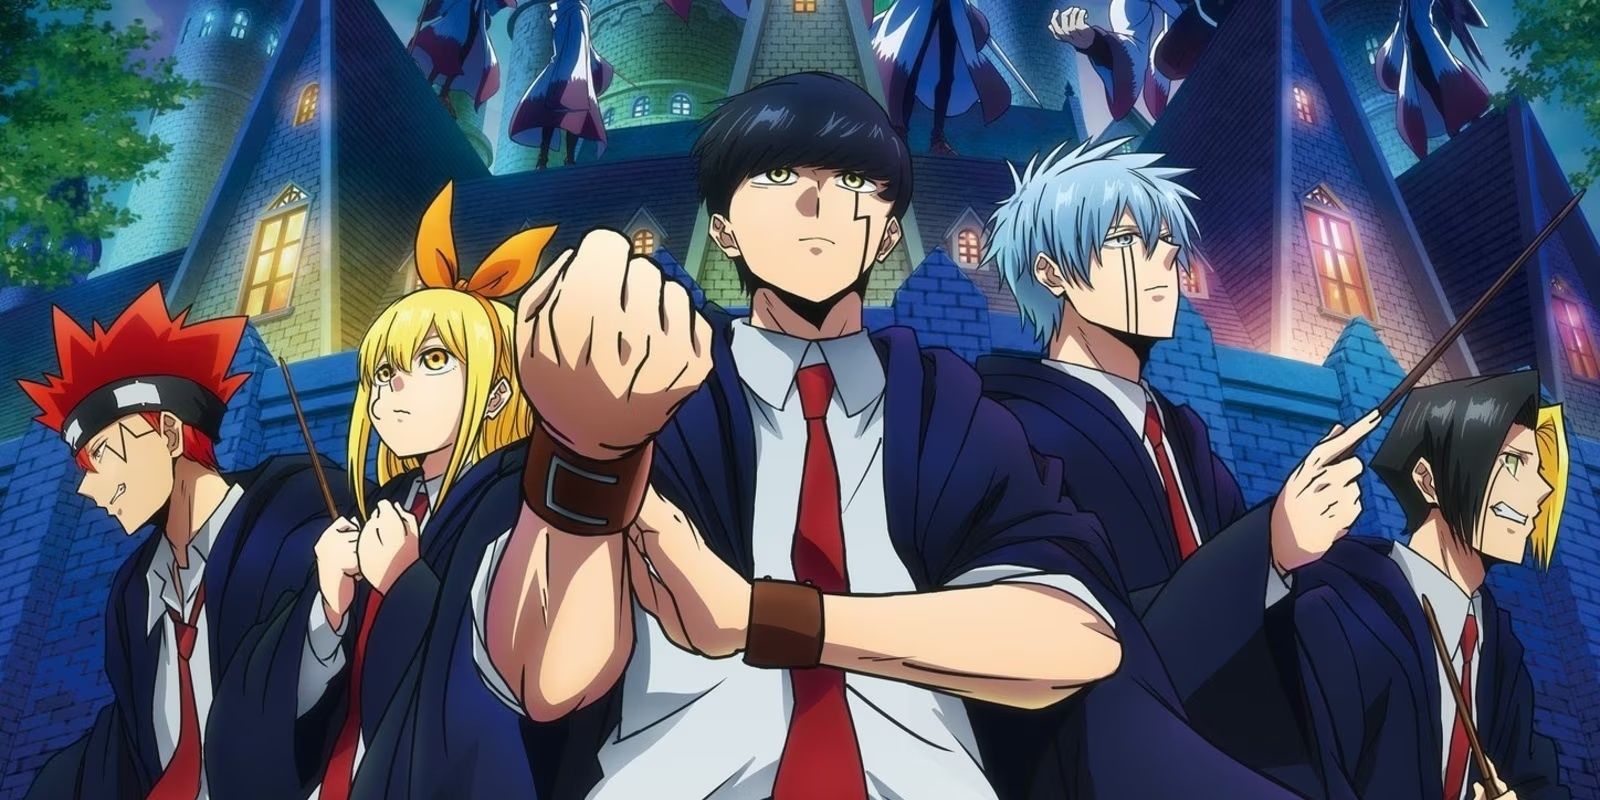 The cast of the Mashle: Magic and Muscles series looking determined.